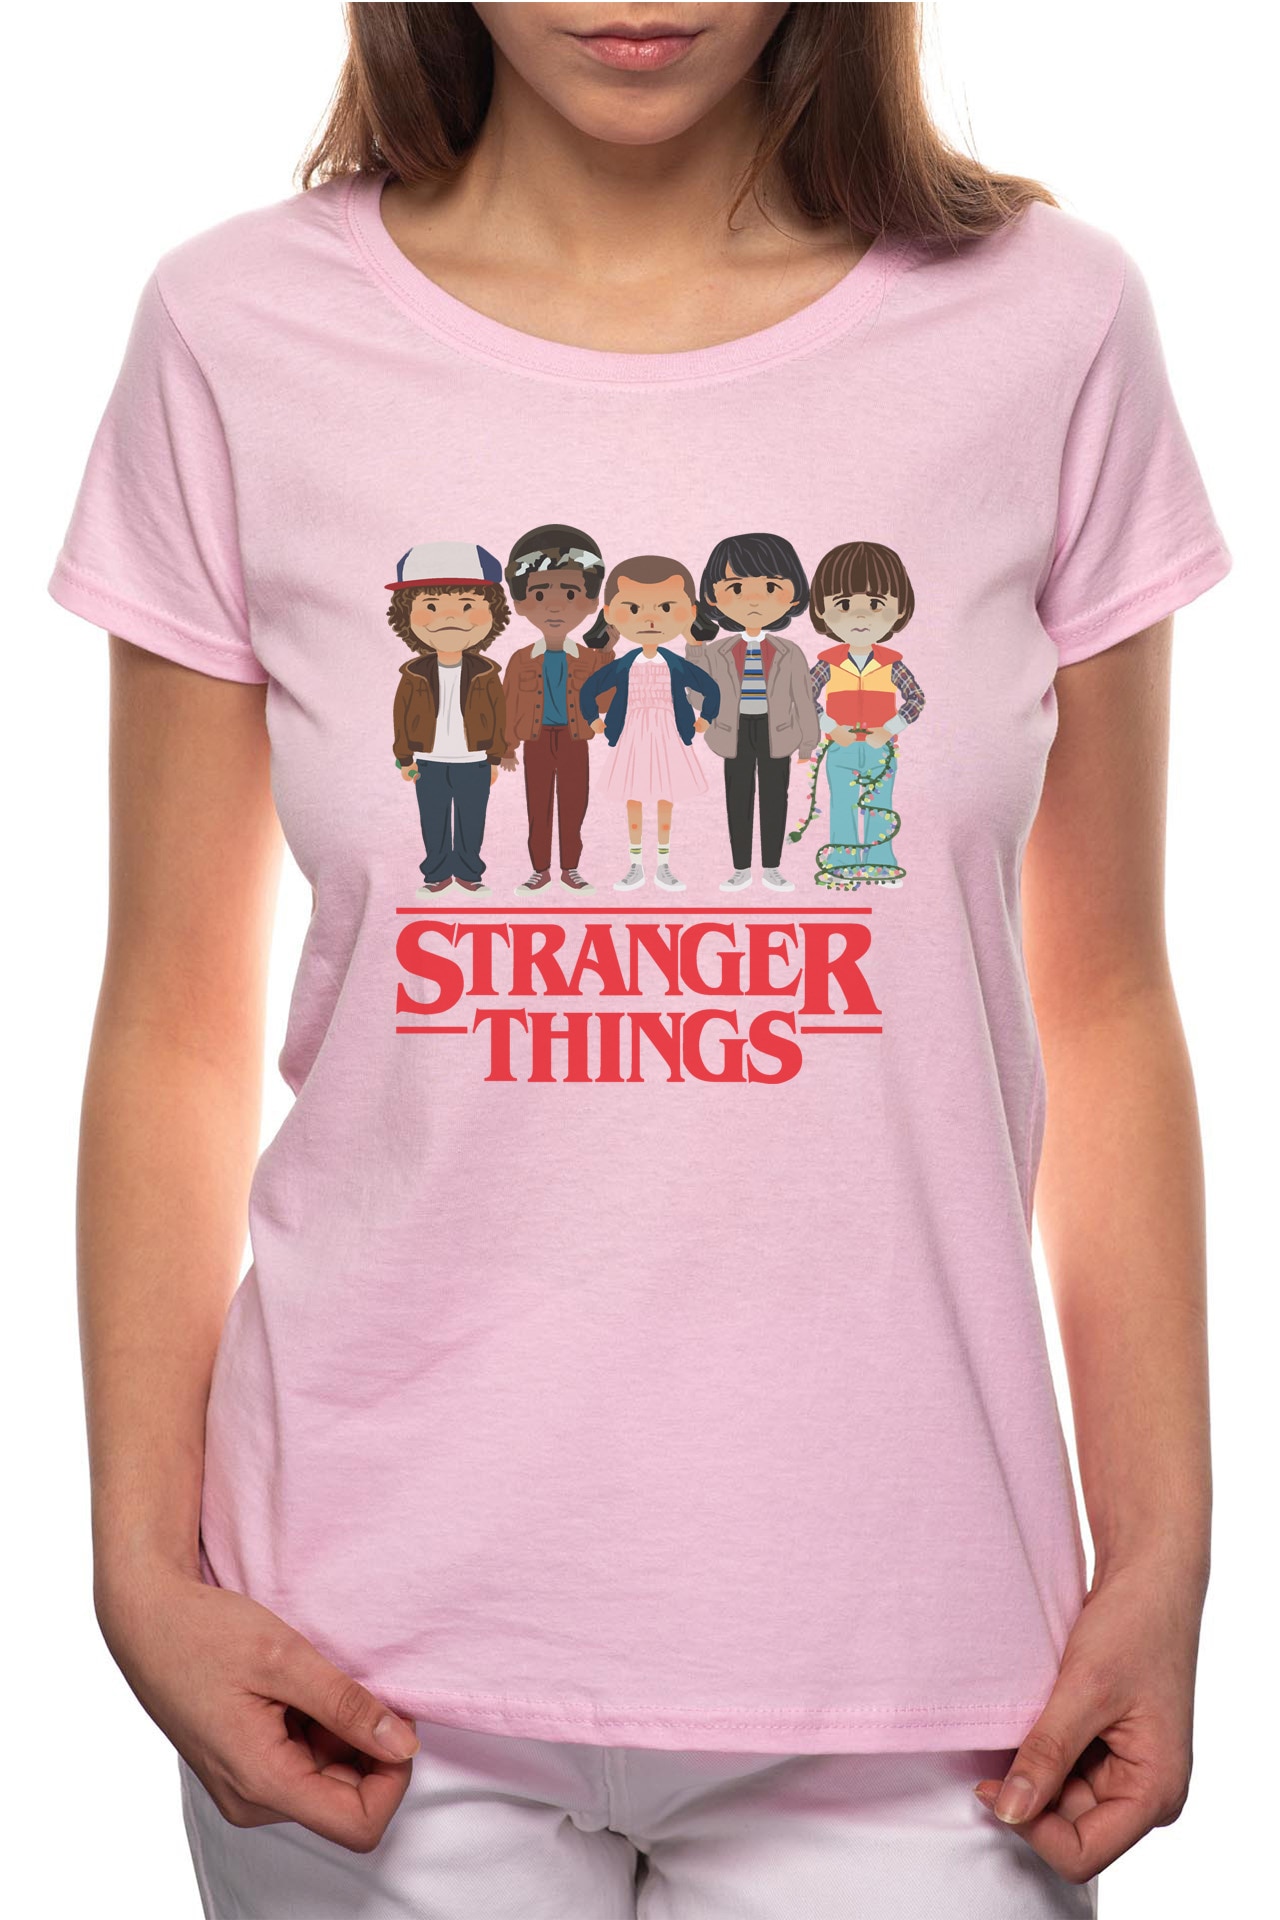 caustic Conqueror I lost my way Tricou dama, Stranger Things - Characters, 100% Bumbac, R174 - eMAG.ro